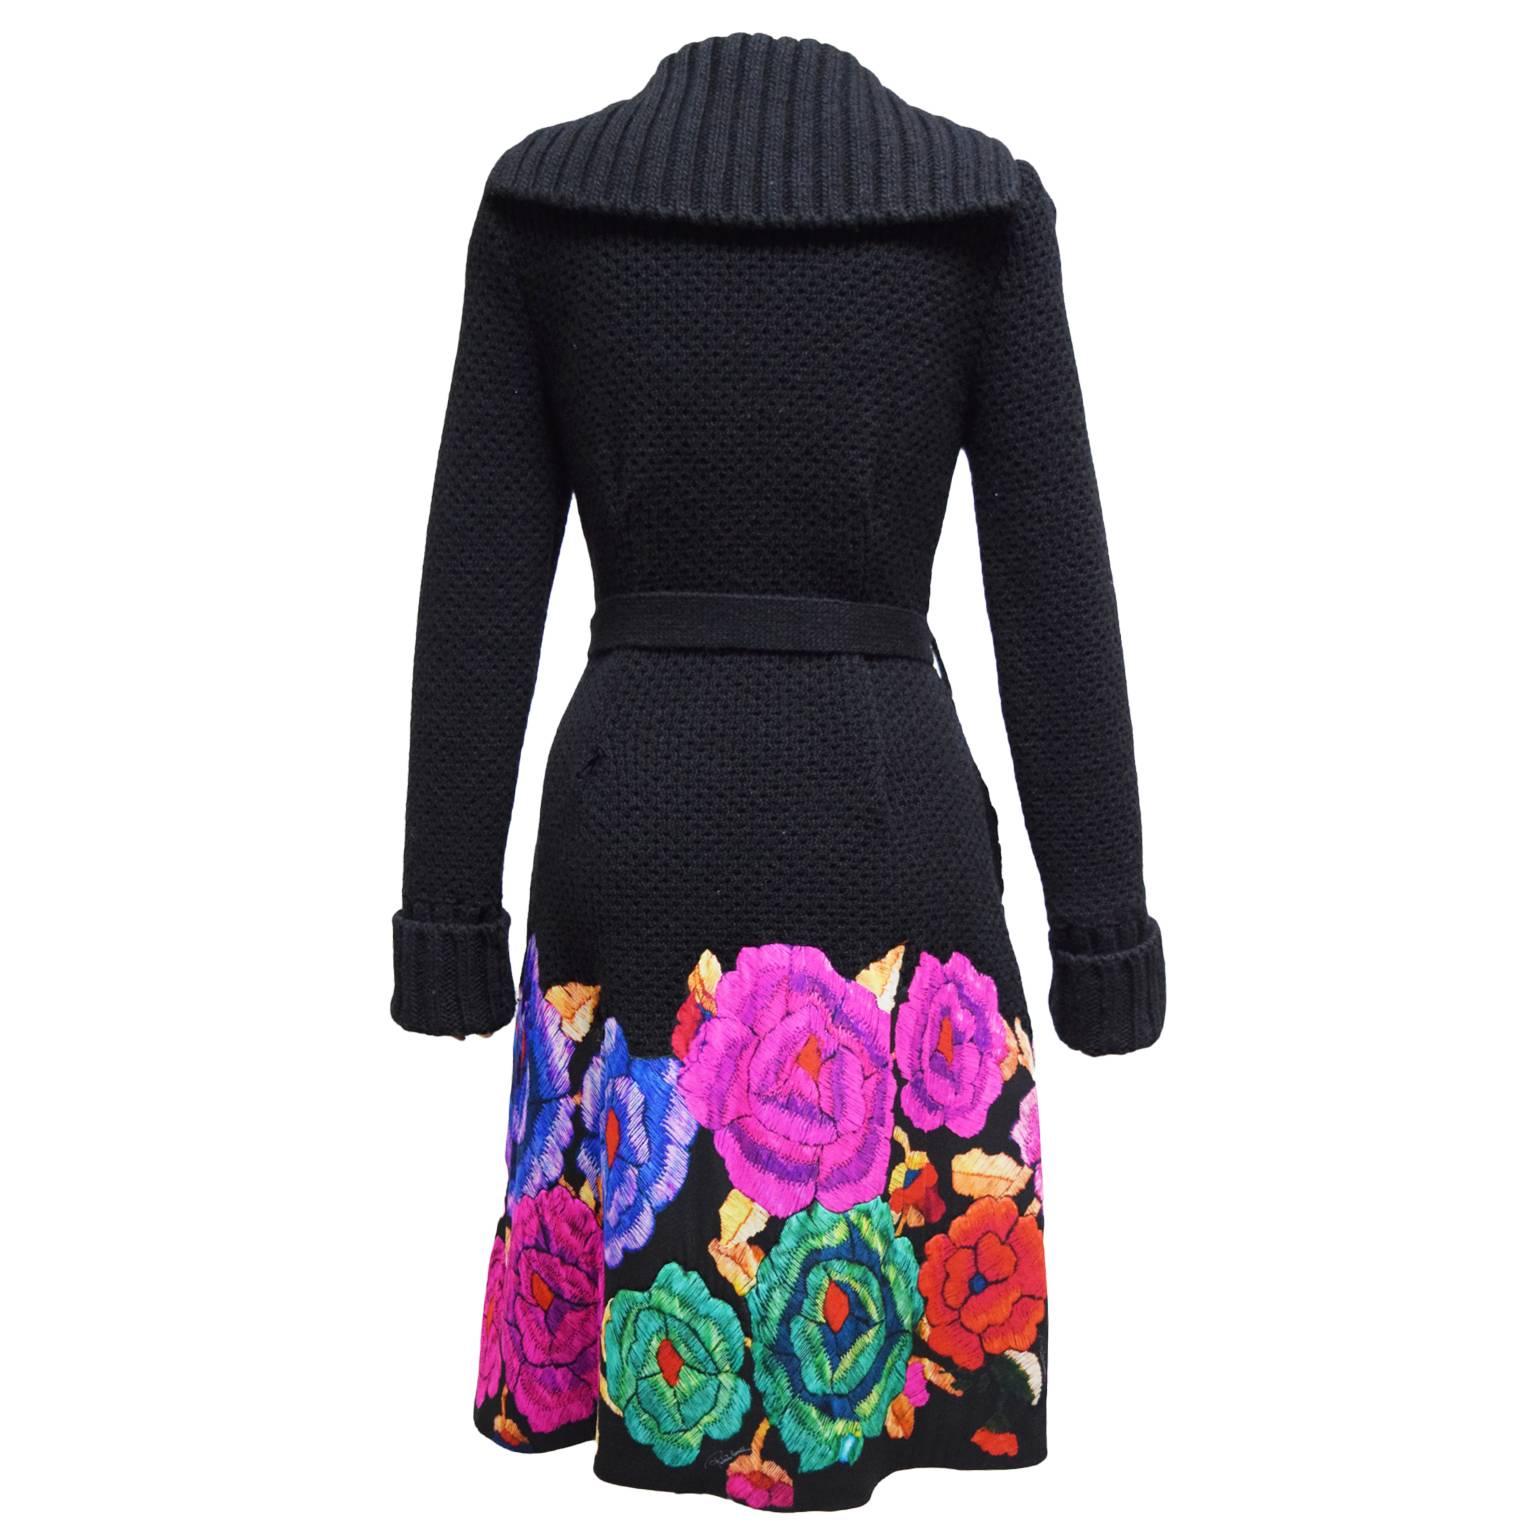 This one of a kind sweater topper by Roberto Cavalli is made from 100% wool and has a multicolored silk floral border. The waist is belted and has a detachable belt and shawl collar. 